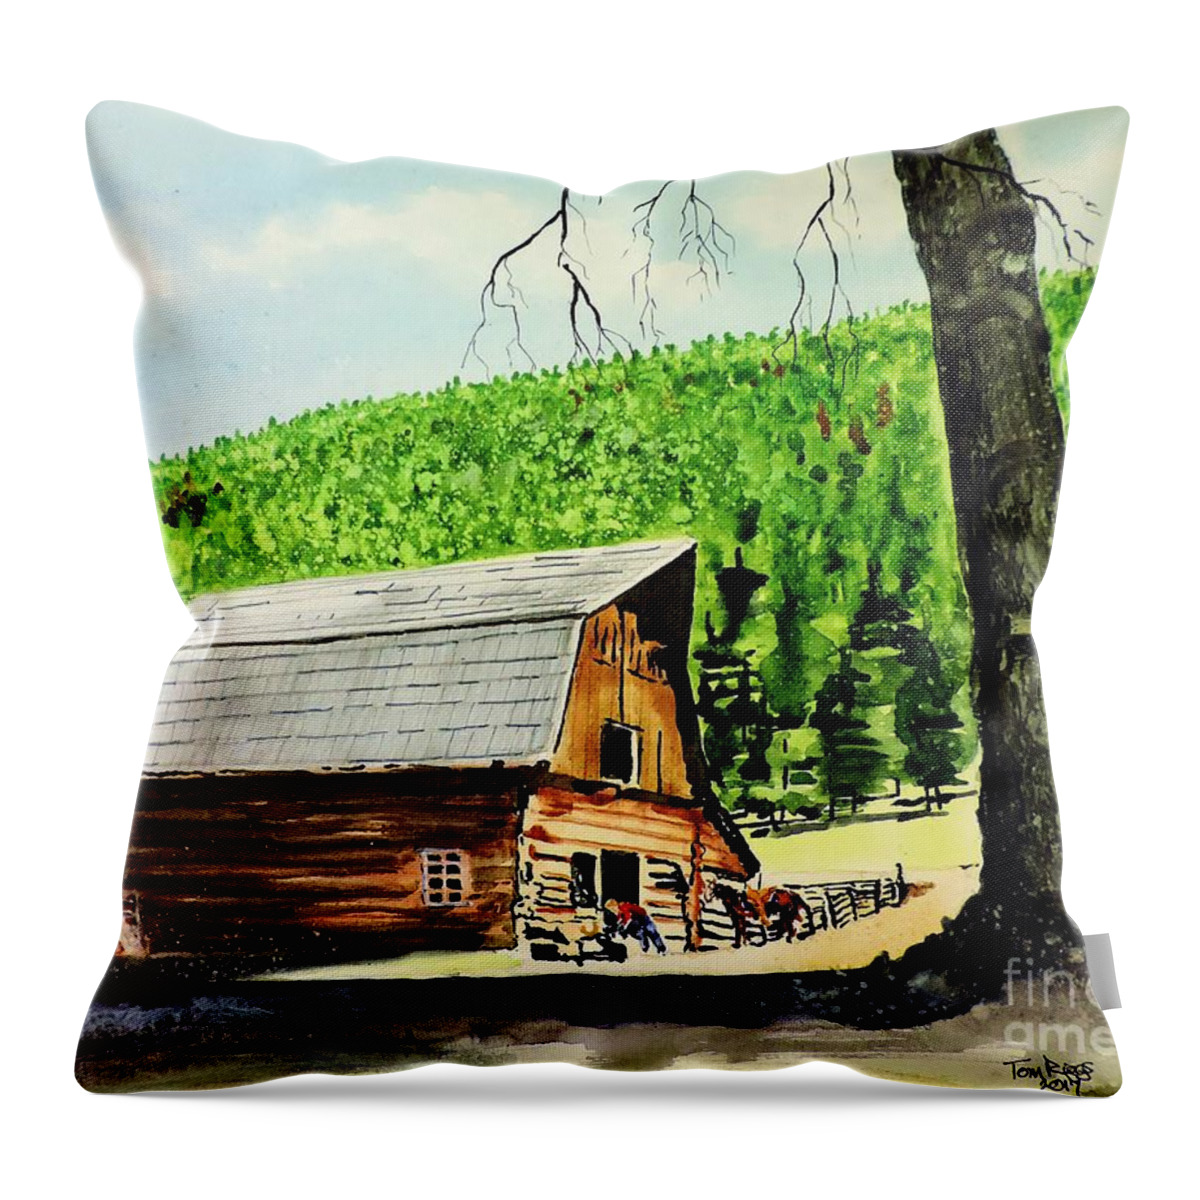 Wyoming Throw Pillow featuring the painting That Barn From That Movie by Tom Riggs